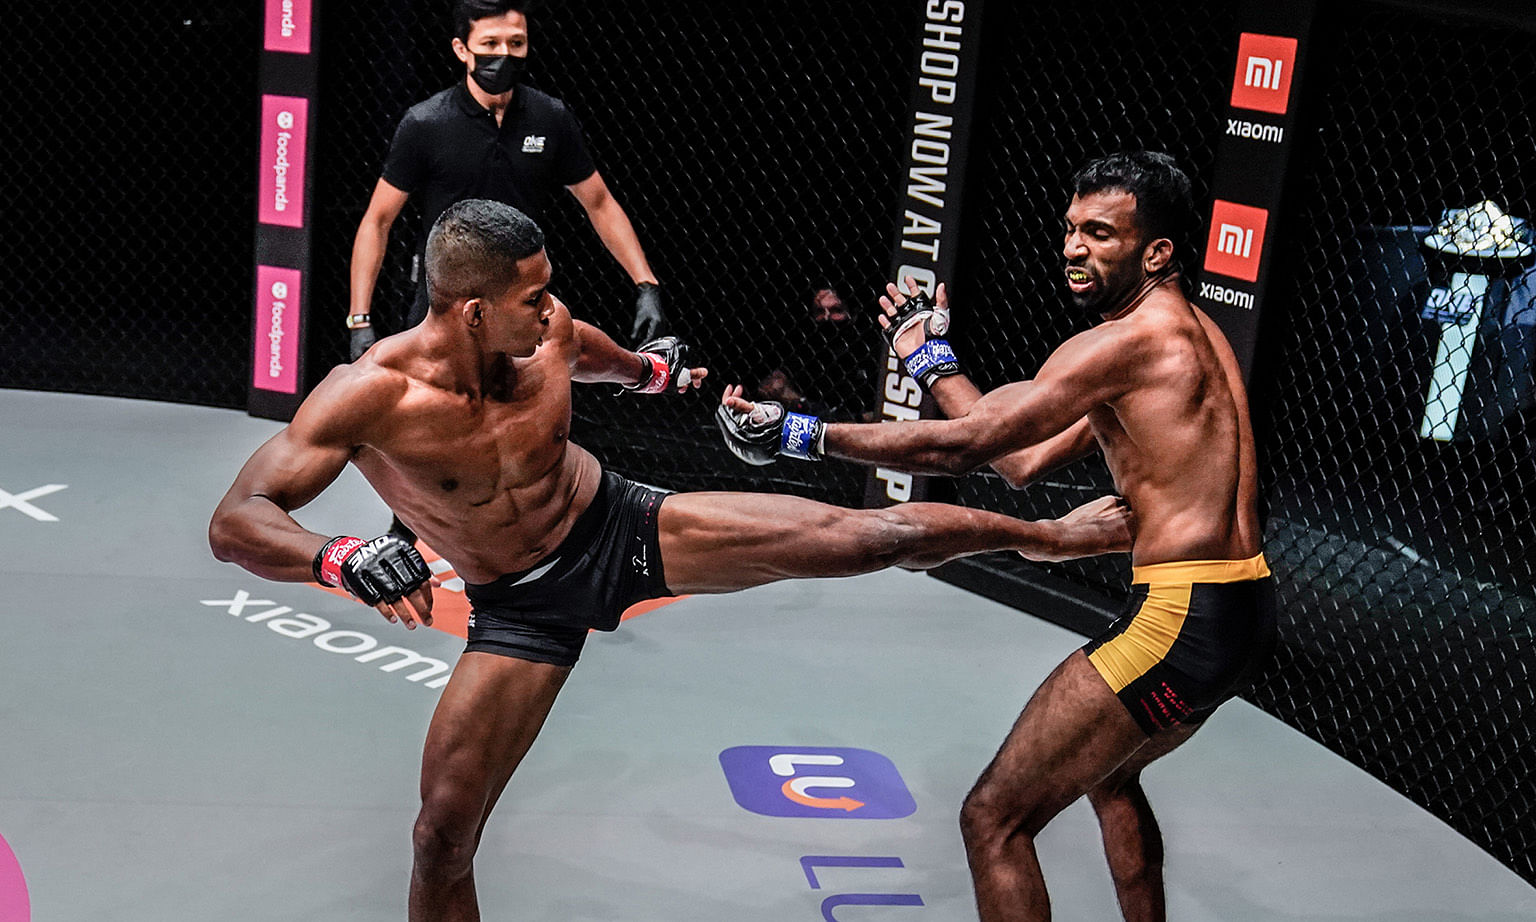 Singaporean MMA fighter Amir Khan landing a kick on India's Rahul Raju at One Championship's Reign of Dynasties event last night. Amir knocked out his opponent in the first round.